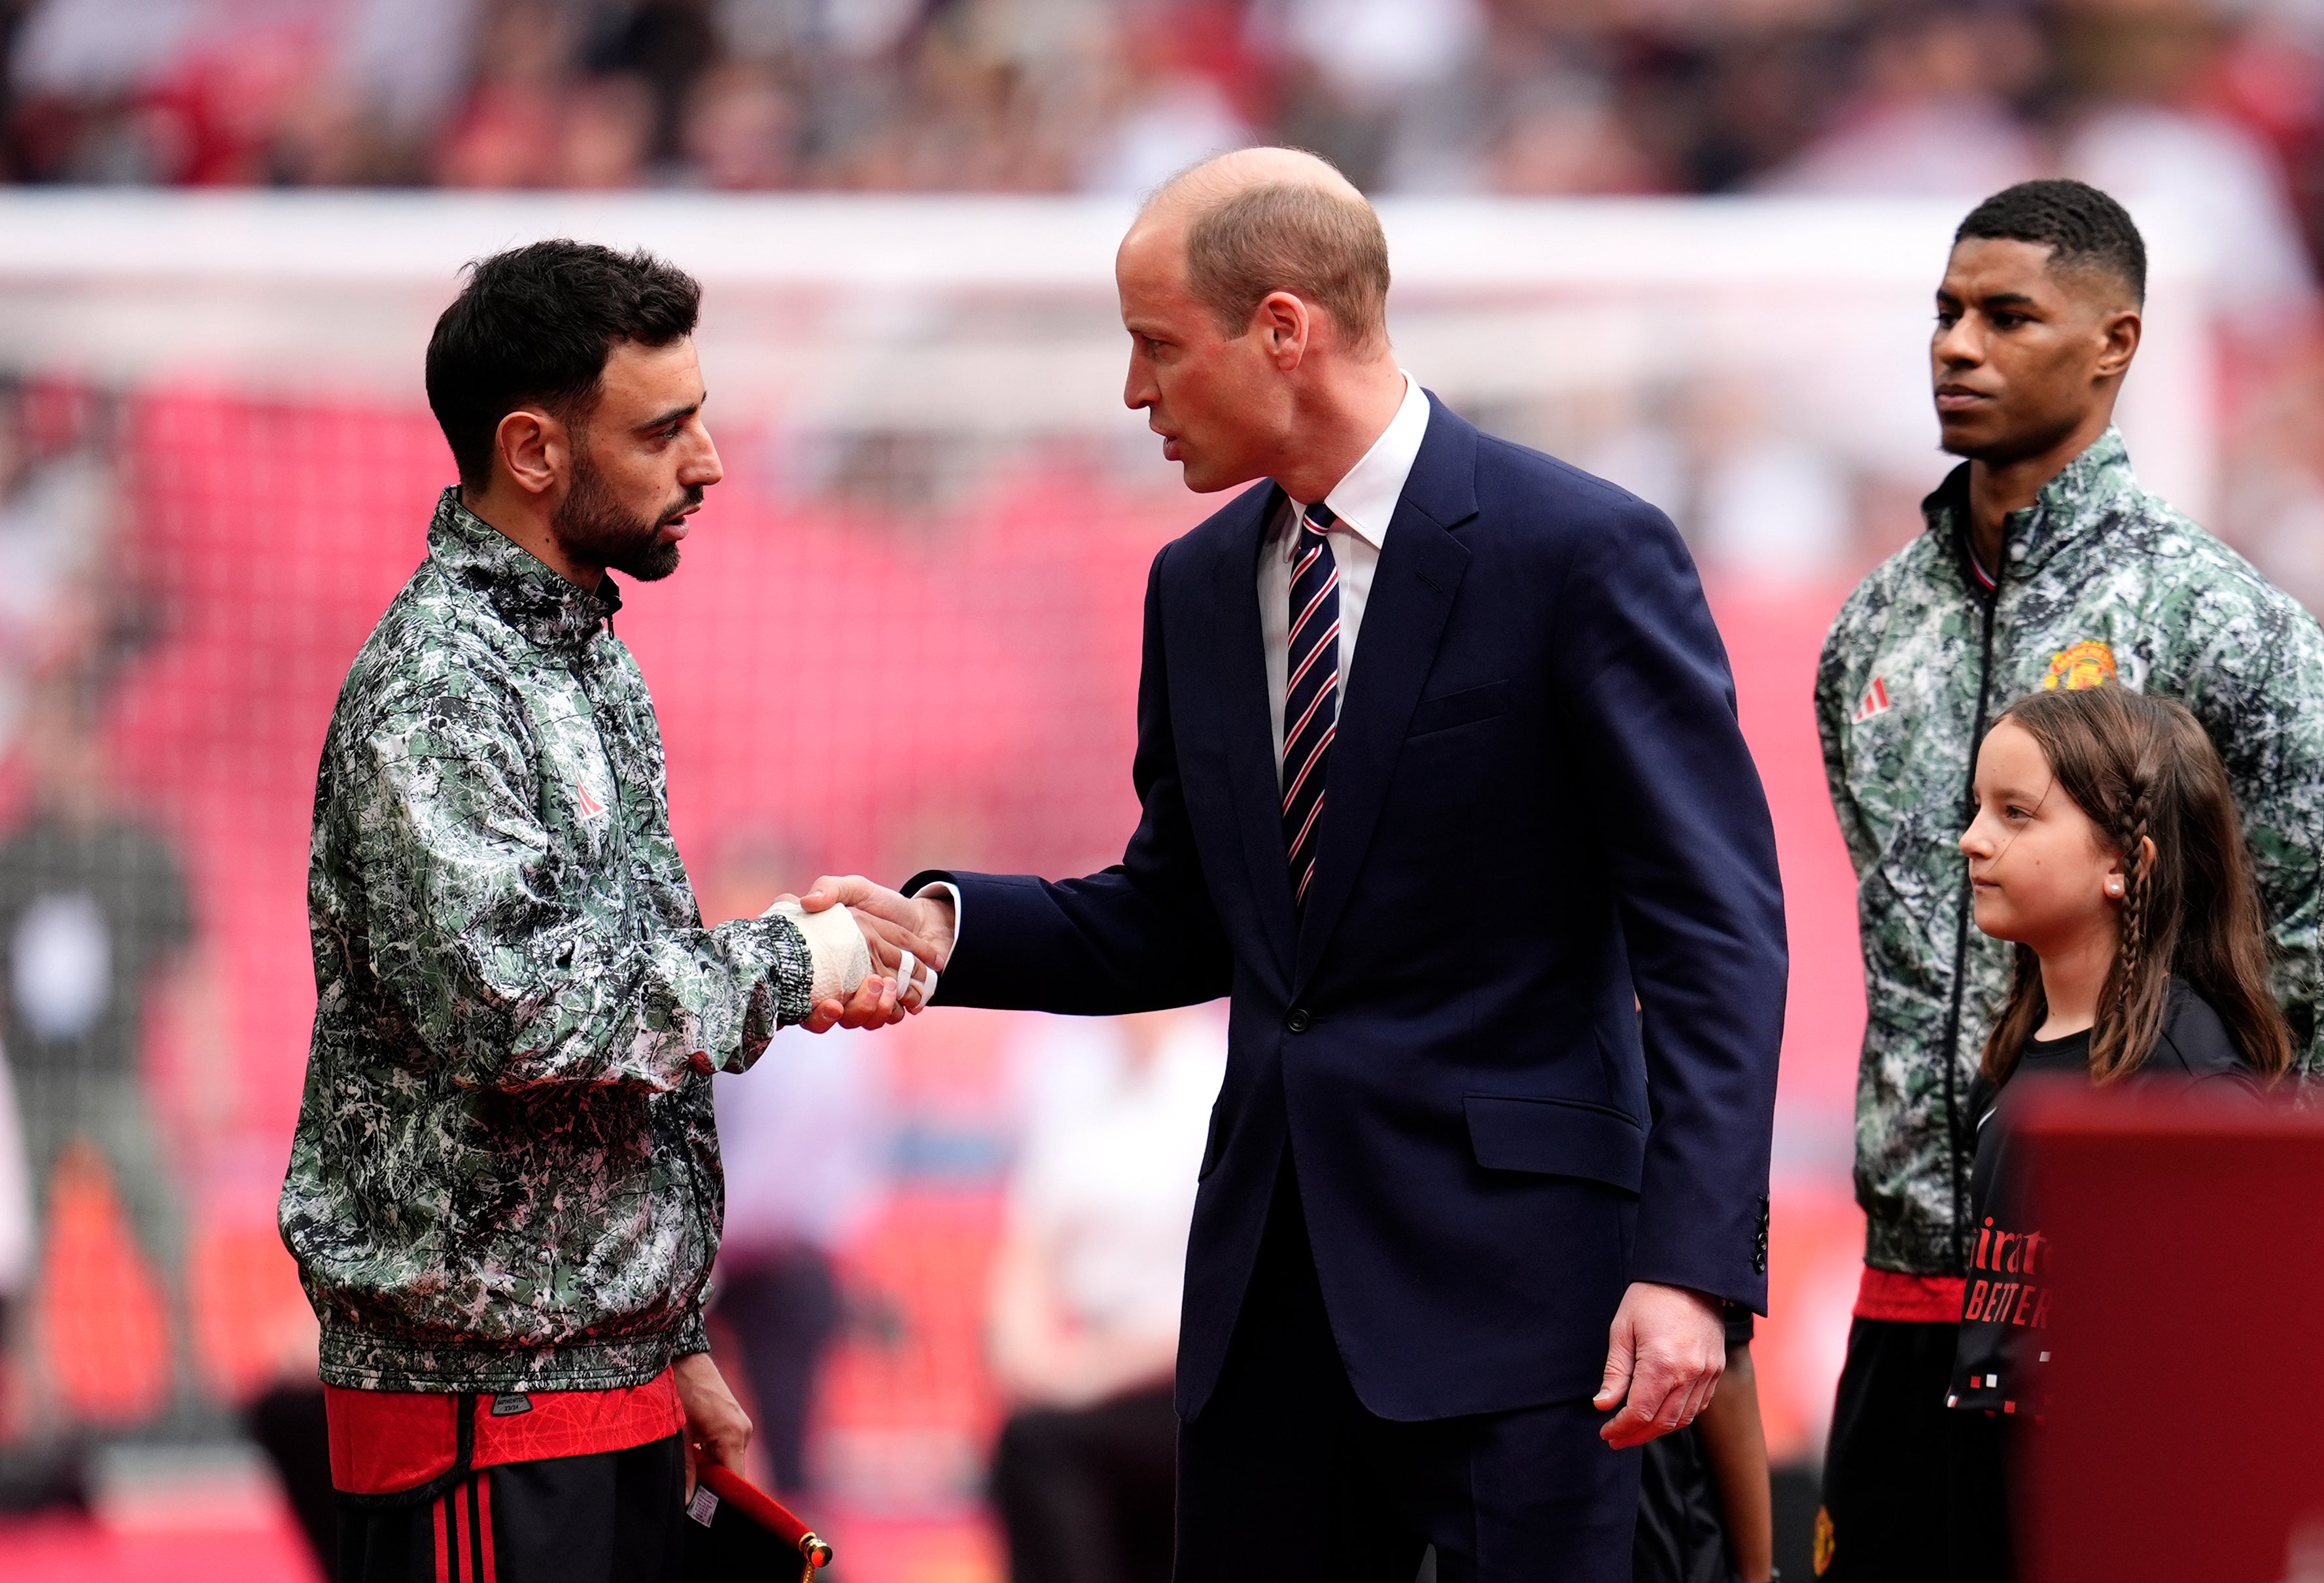 Prince William attends FA Cup last as Harry and Meghan picture finds new house